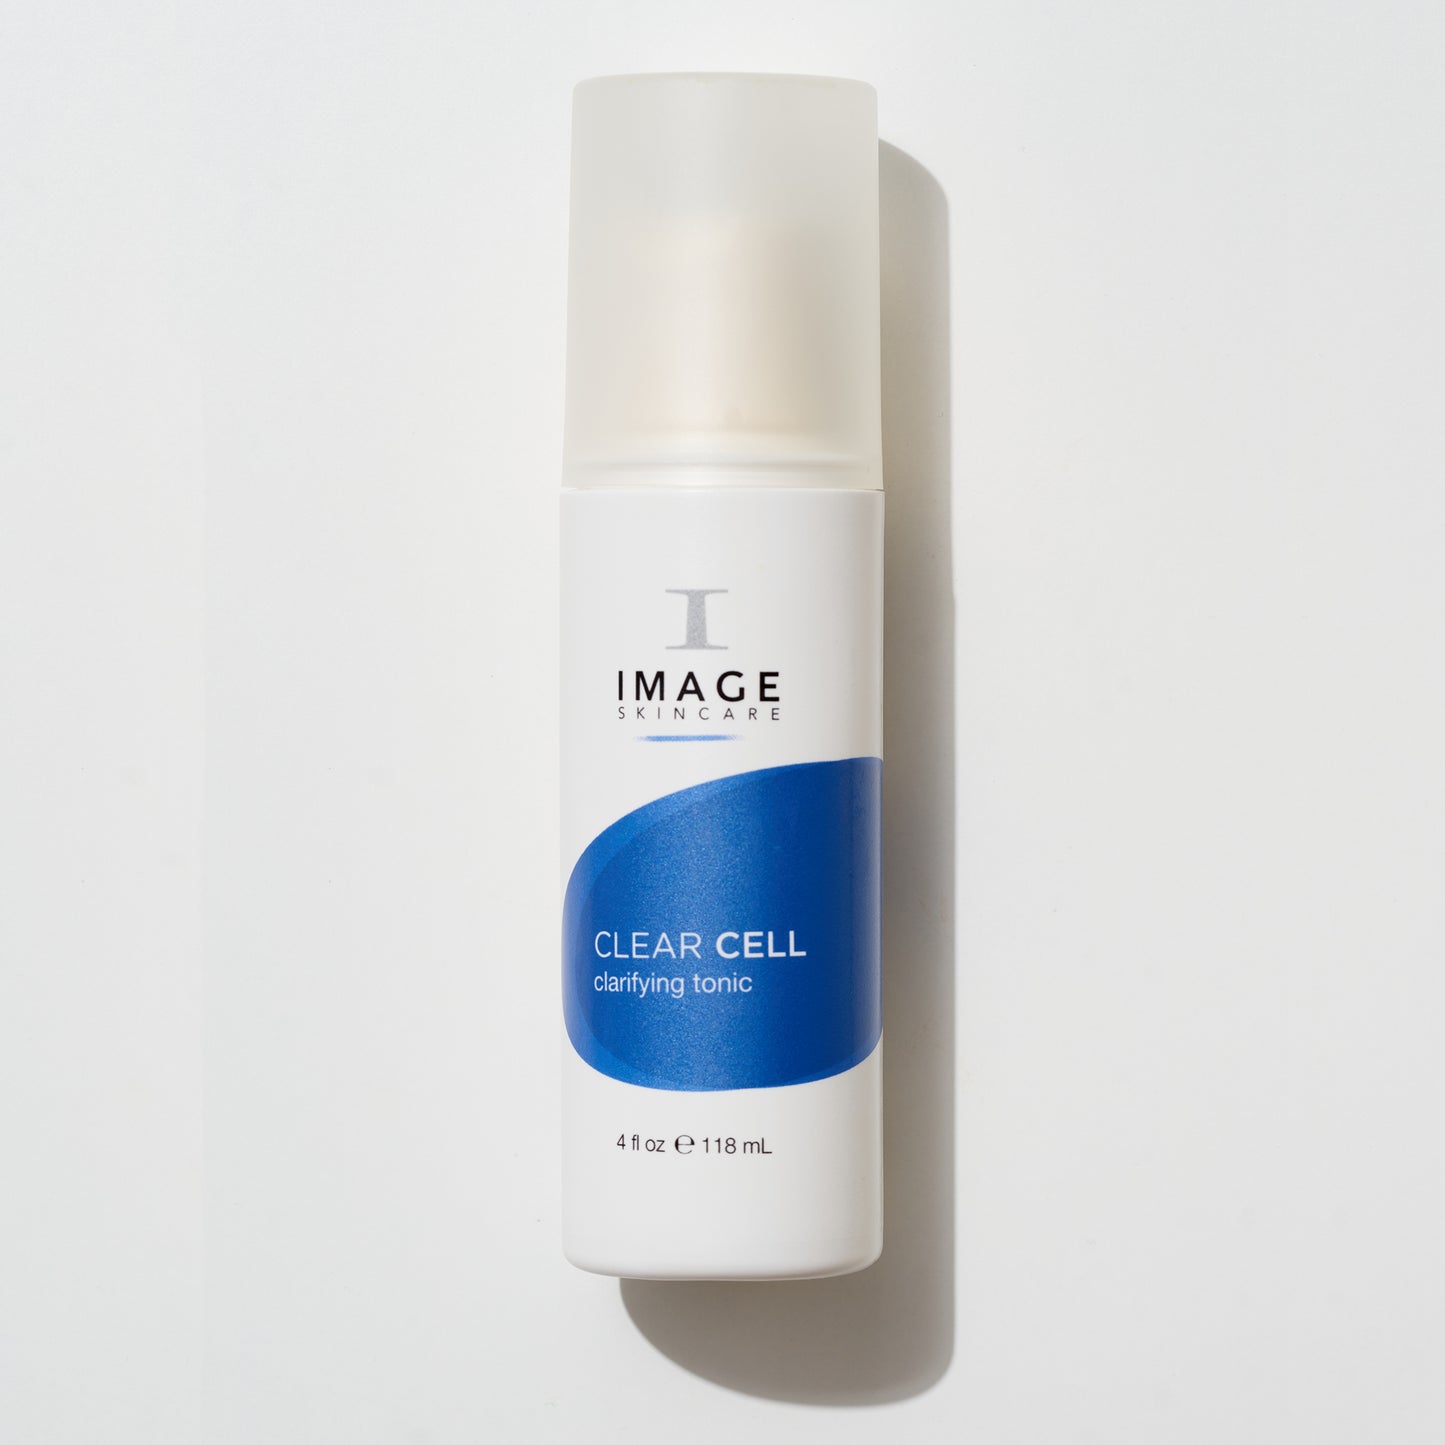 CLEAR CELL Clarifying Tonic, Image Skincare